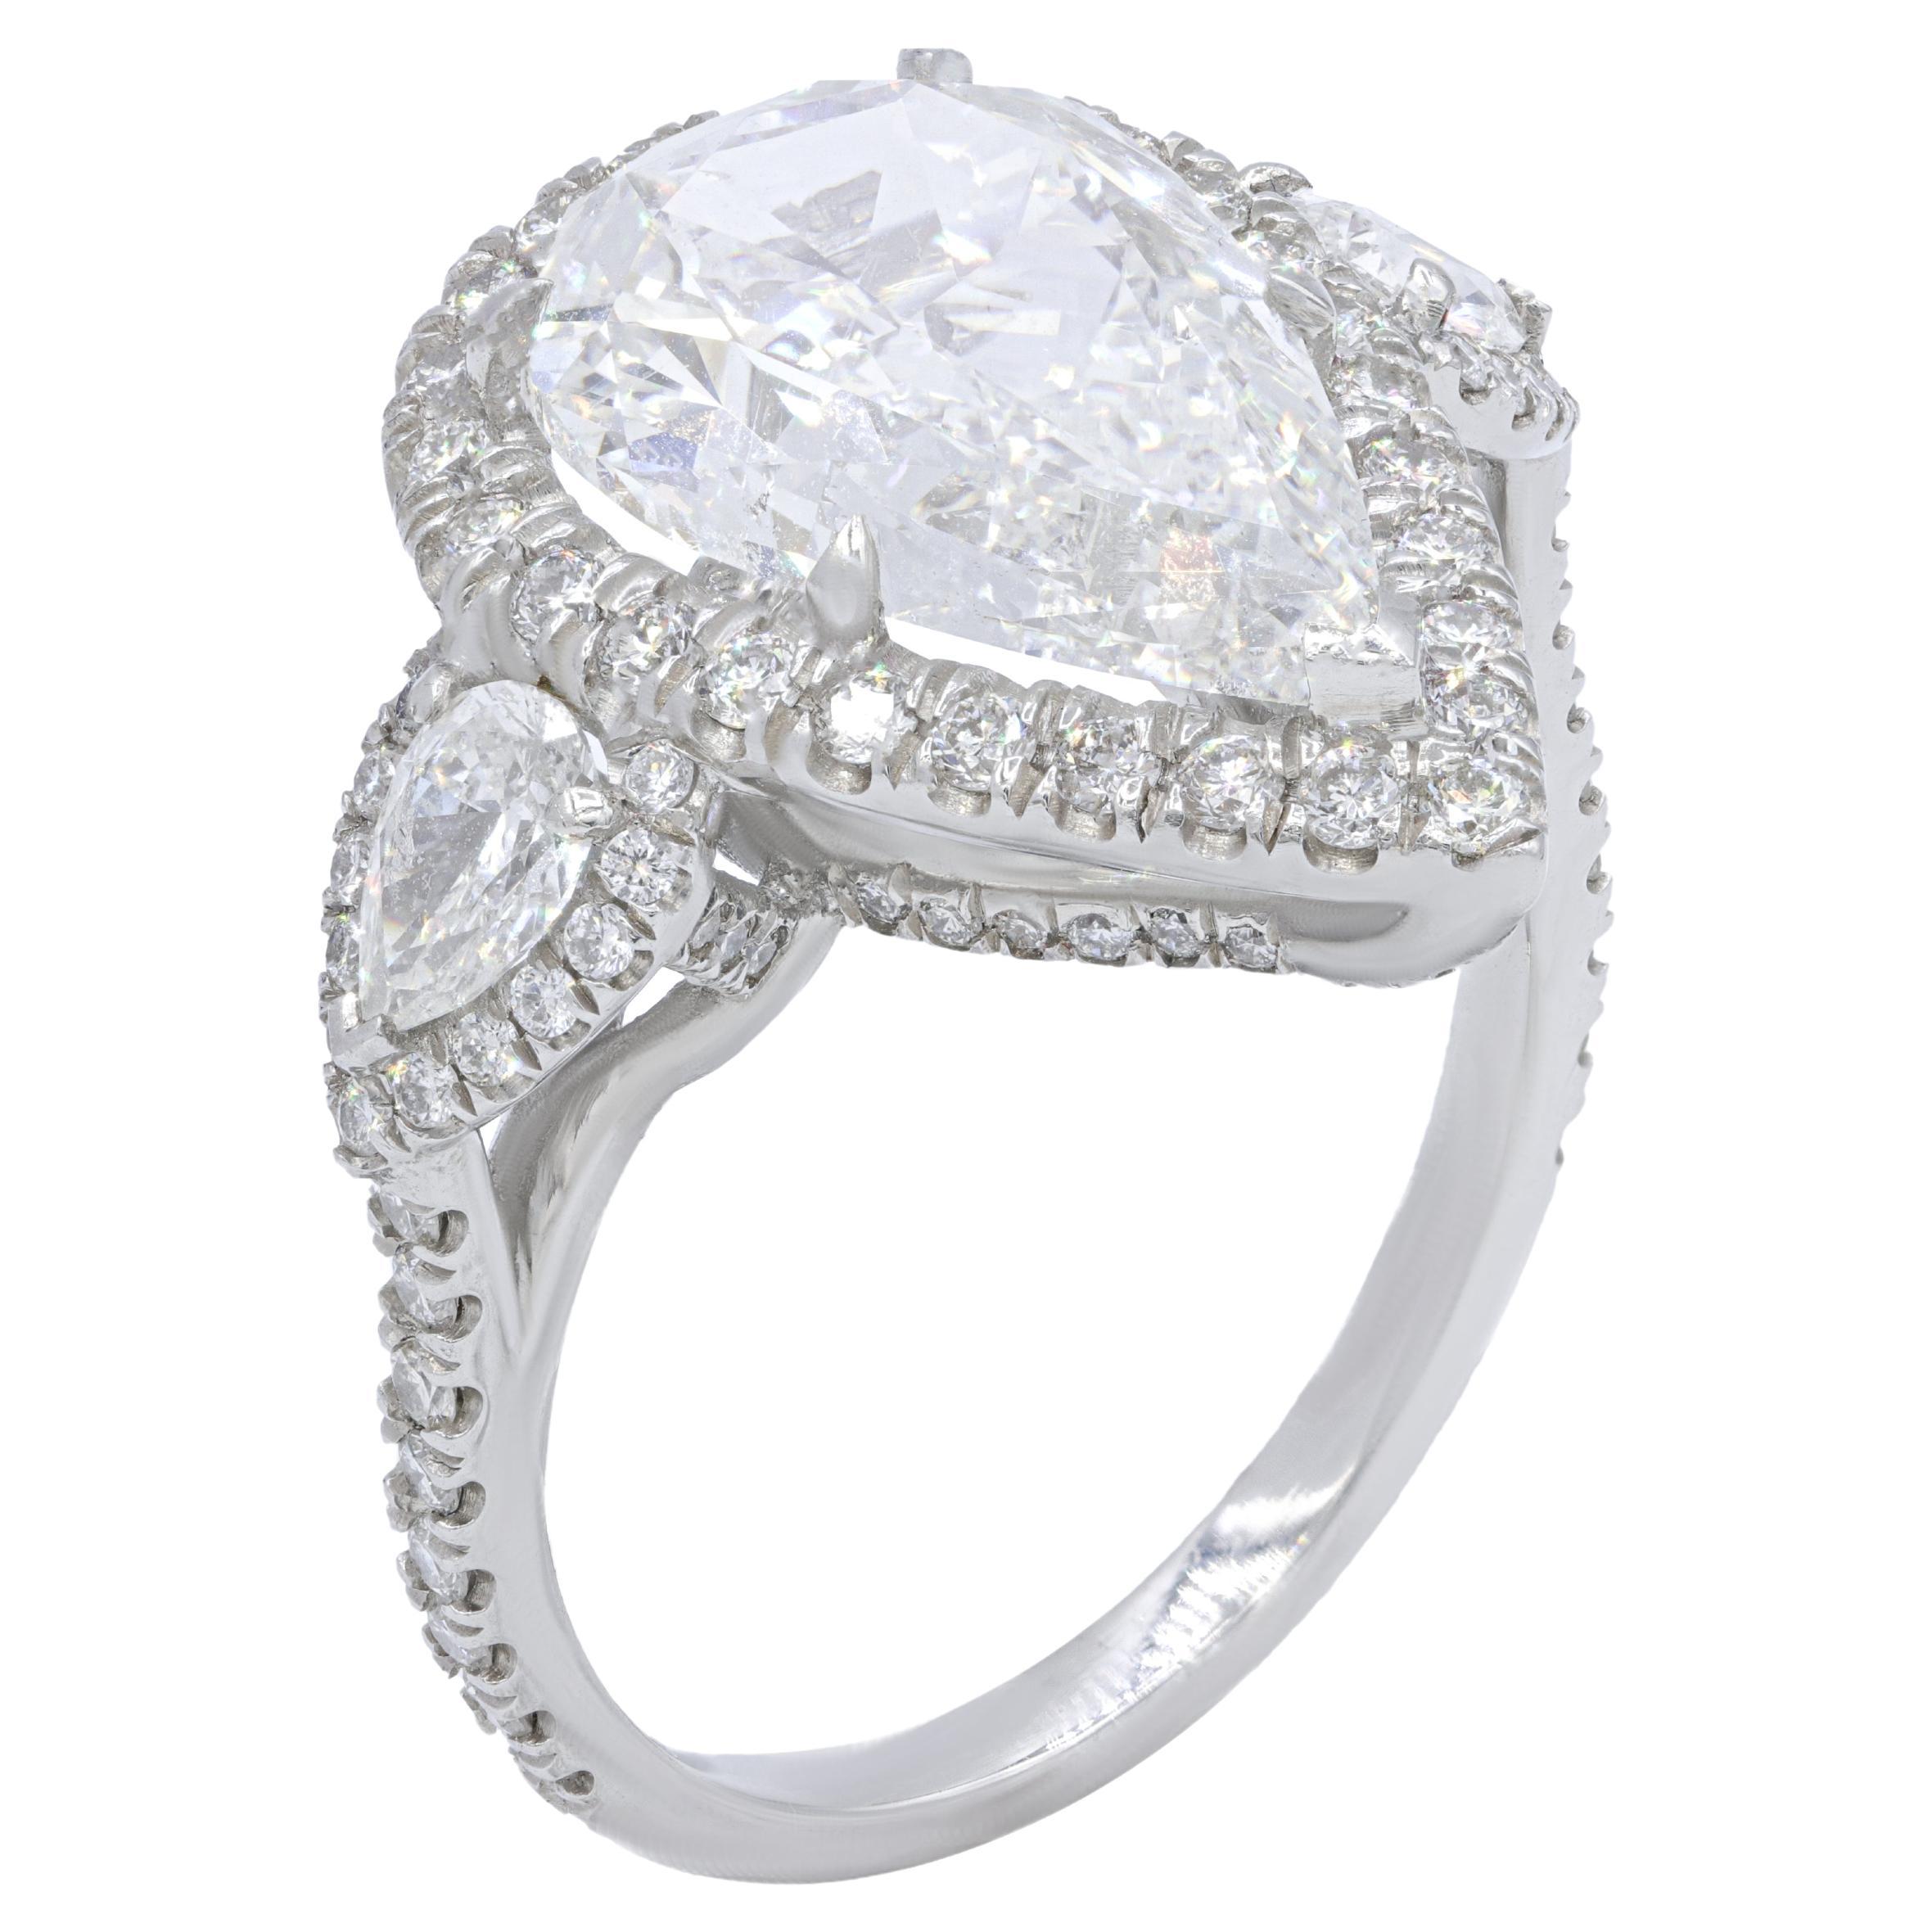 Diana M. Platinum engagement ring featuring a center 5.01 ct GIA (G-SI2) For Sale